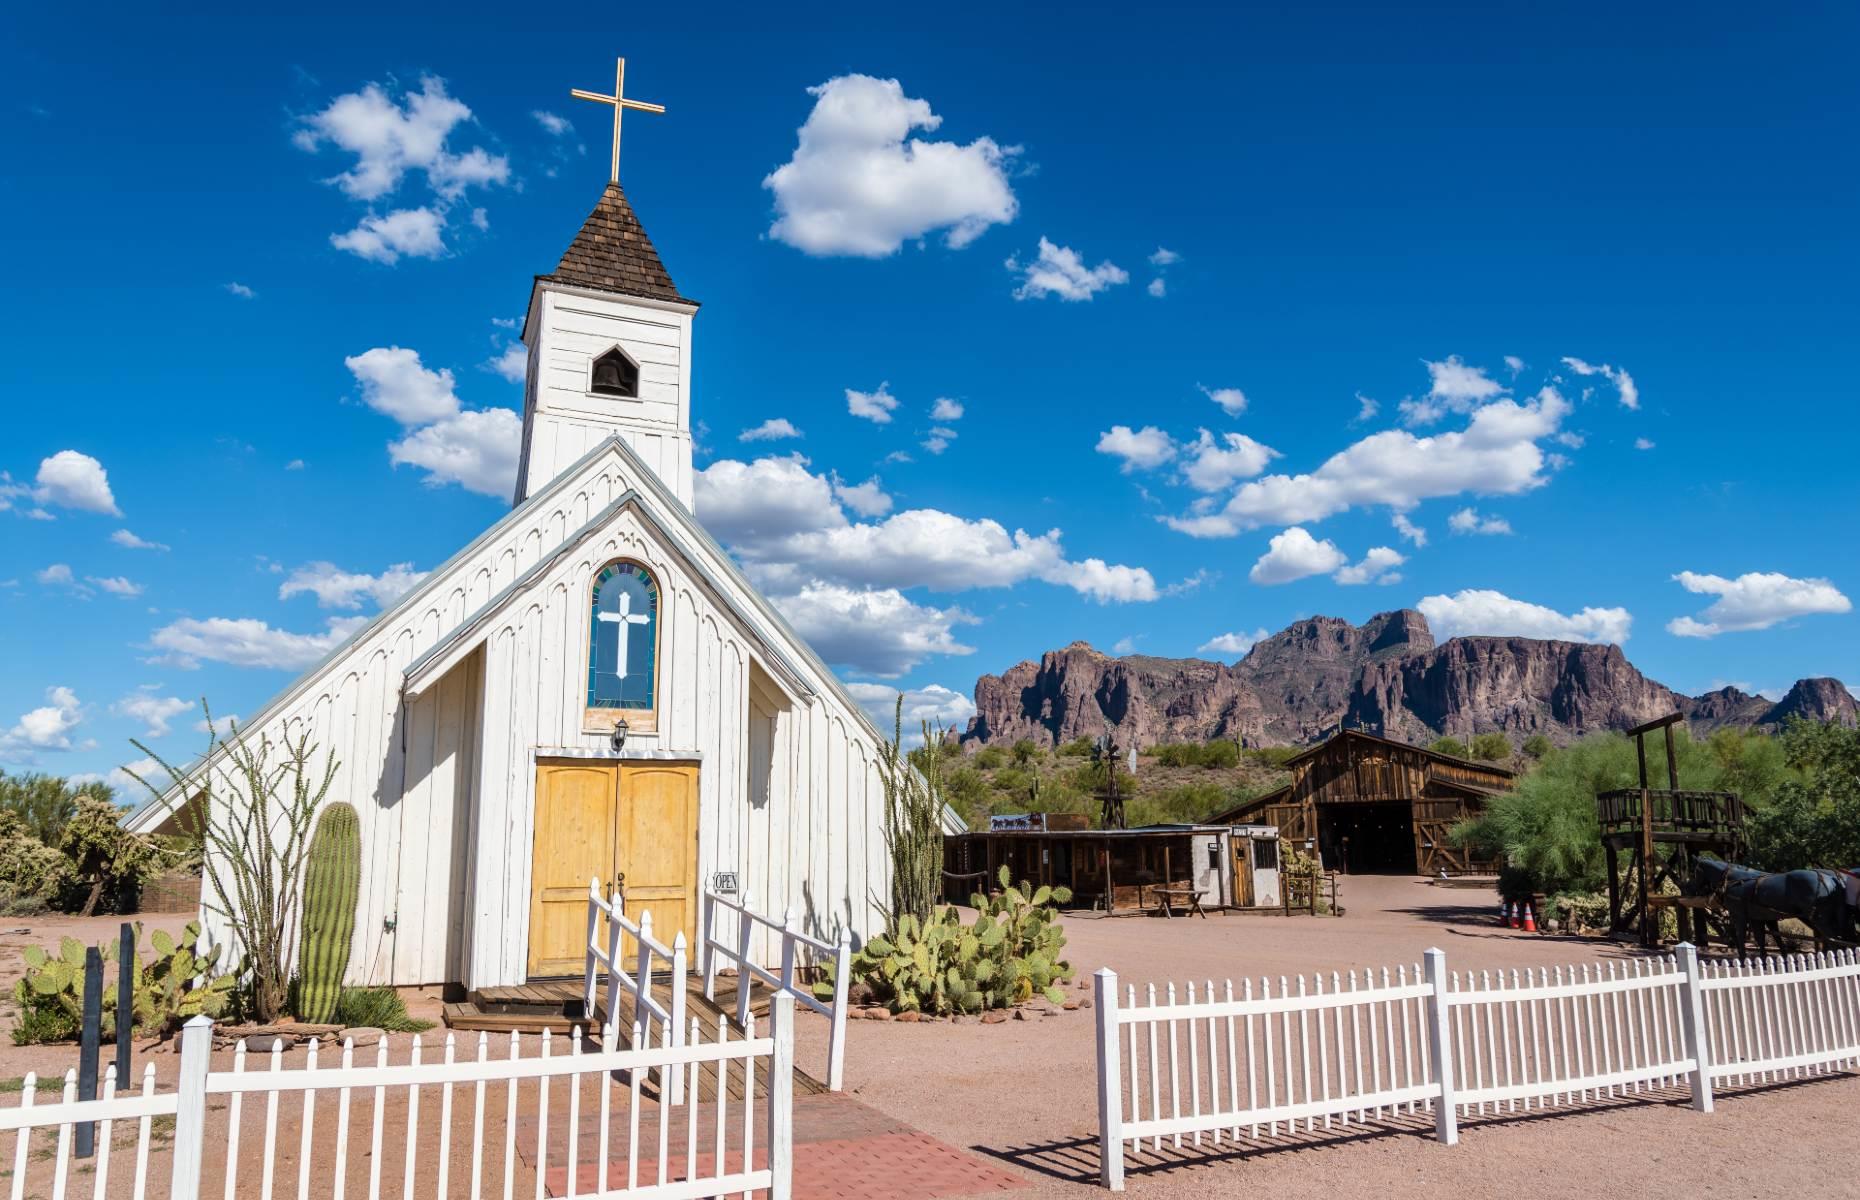 <p>For a combination of stunning scenery and Wild West movie memorabilia, head to the Superstition Mountain Museum. Located at the foot of its namesake mountains, which are well worth exploring via the Apache Trail if you’ve the time, its 4,900-square foot (455sqm) exhibition hall houses an eclectic mishmash of Old West scenes from famous movies, horse-drawn carts and a historical model railroad. There’s also the Elvis Chapel, a small museum and wedding chapel paying homage to The King, whose western movie <em>Charro! </em>was filmed here. </p>